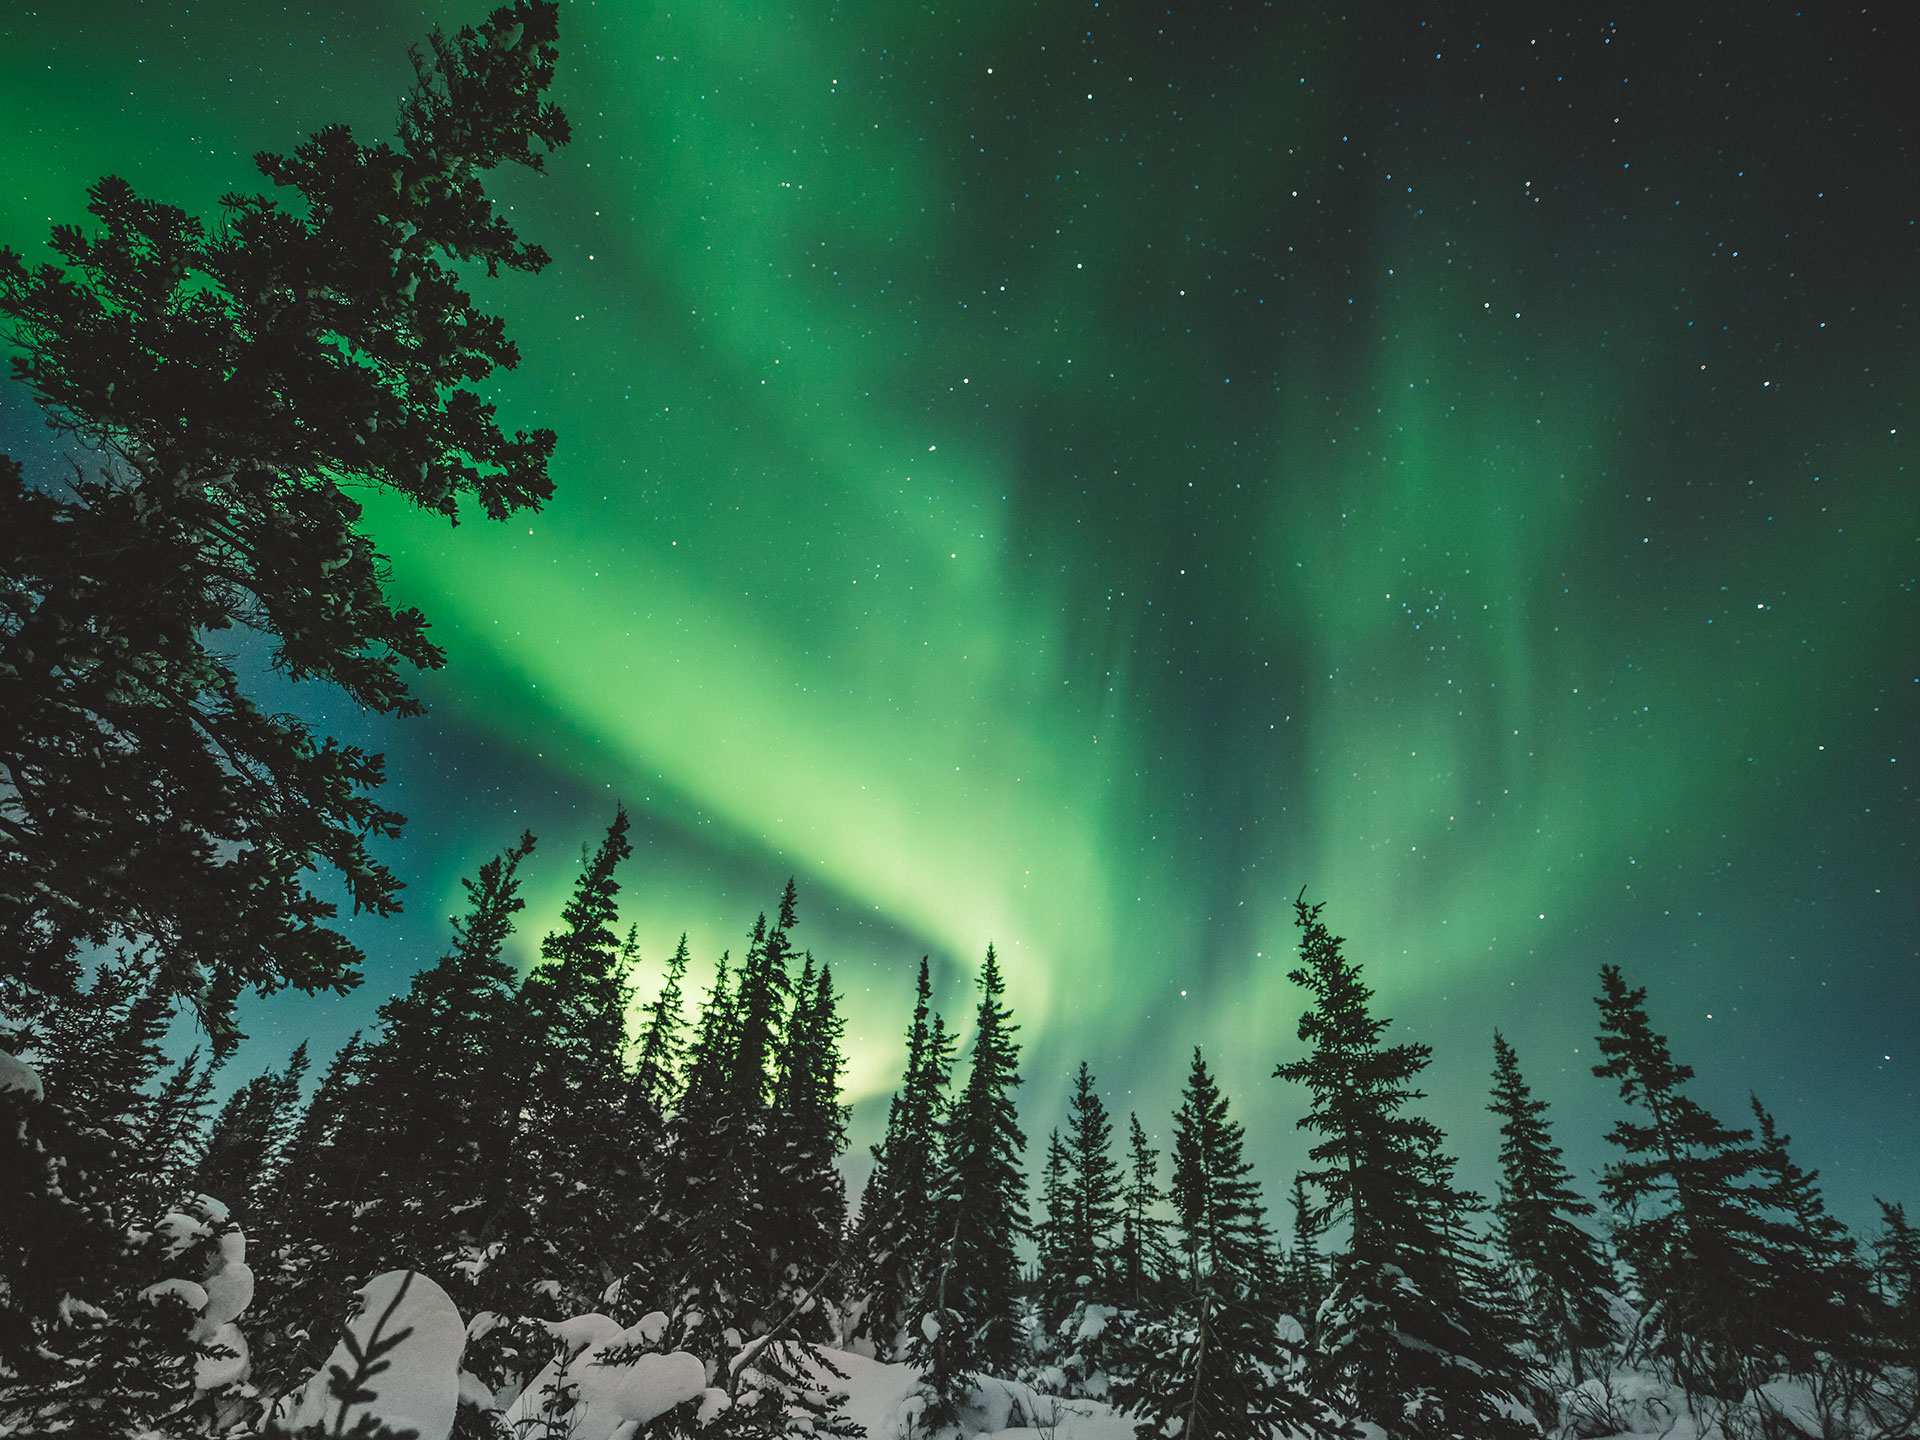 Visit Churchill Manitoba | The Northern Lights over trees